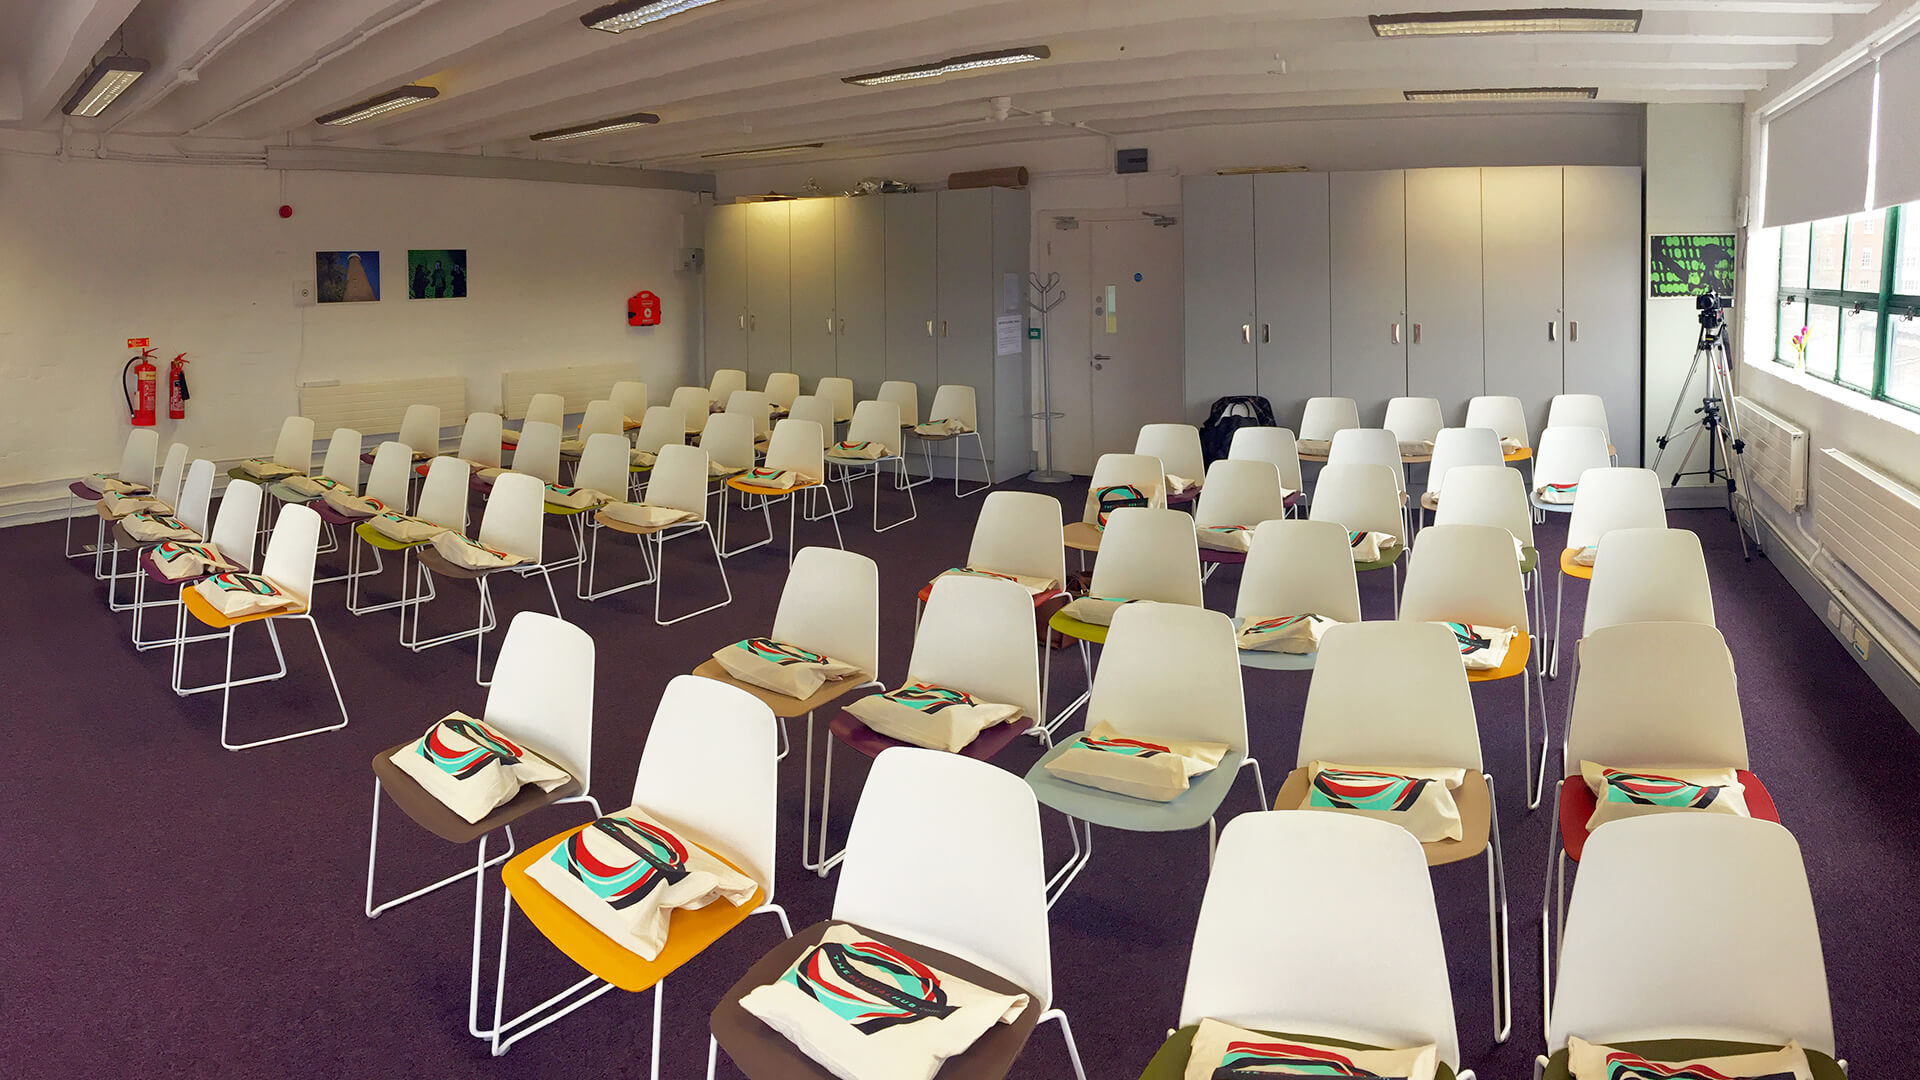 Rows of white chairs in a meeting room with 'Digital Hub' bags on each seat